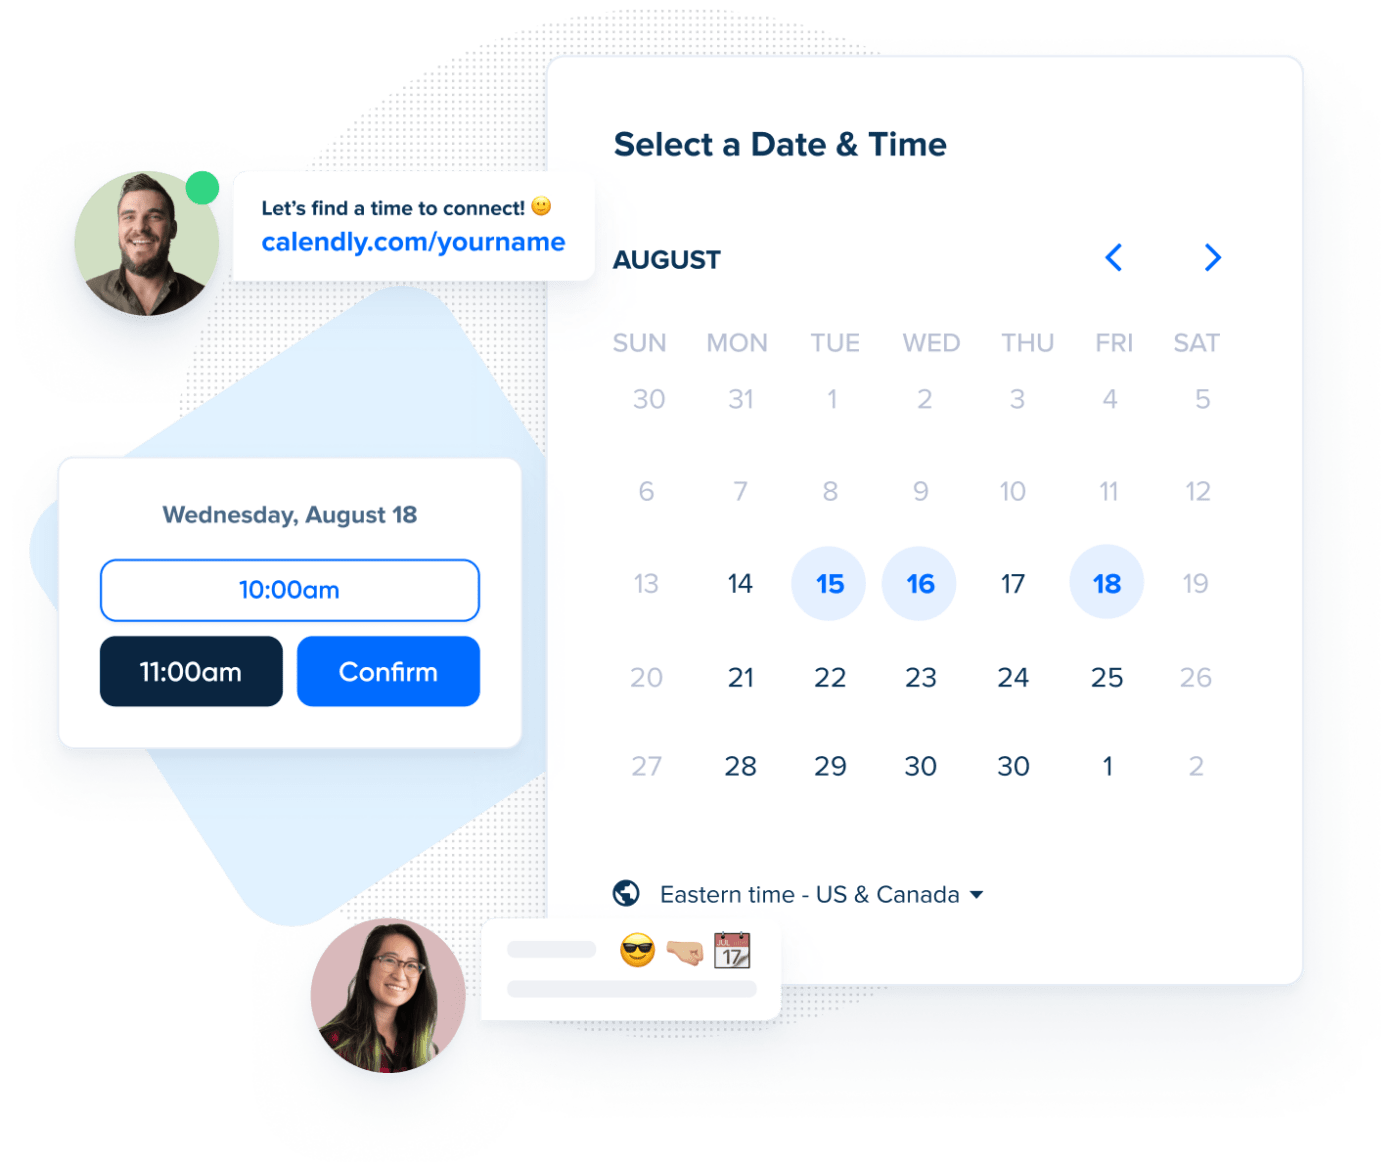 Scheduling meetings with Calendly